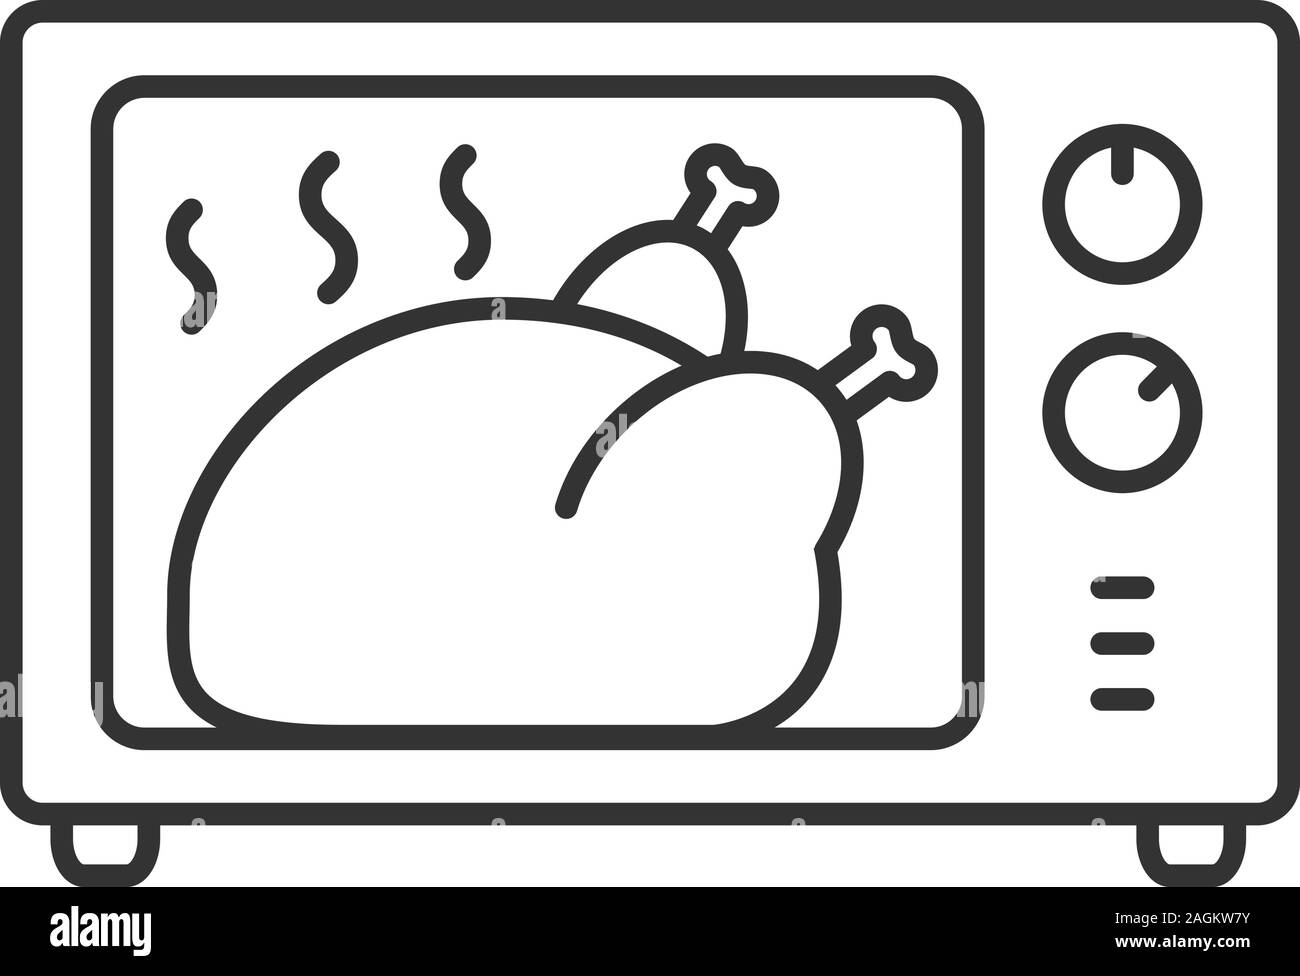 https://c8.alamy.com/comp/2AGKW7Y/whole-chicken-grilling-in-microwave-oven-linear-icon-thin-line-illustration-thanksgiving-turkey-contour-symbol-vector-isolated-drawing-2AGKW7Y.jpg